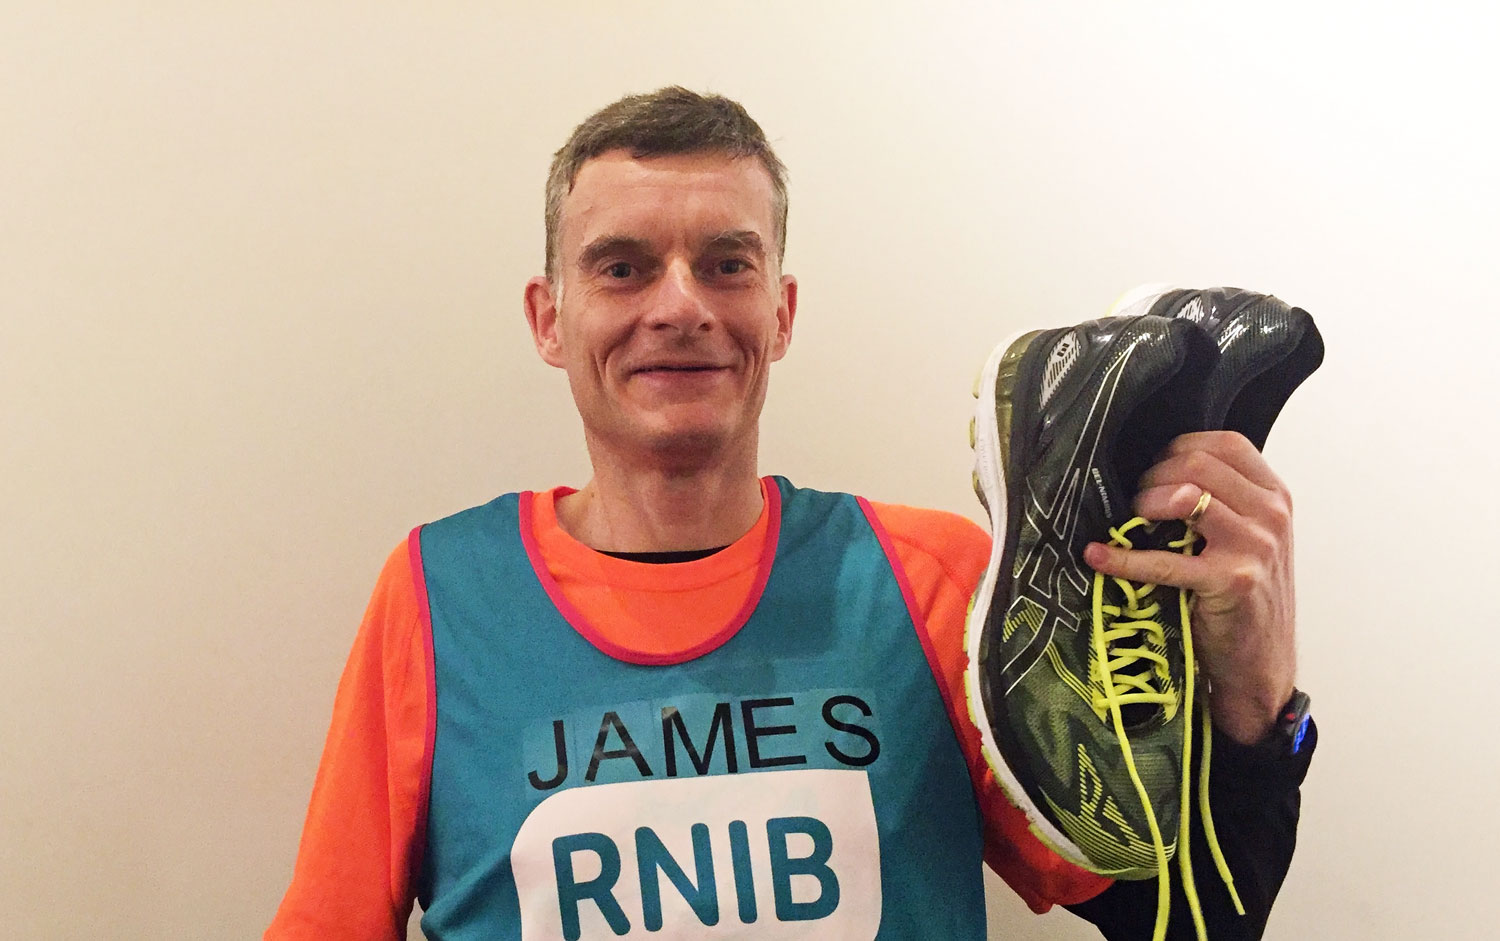 James Holman is gearing up for the London Marathon on 22 April